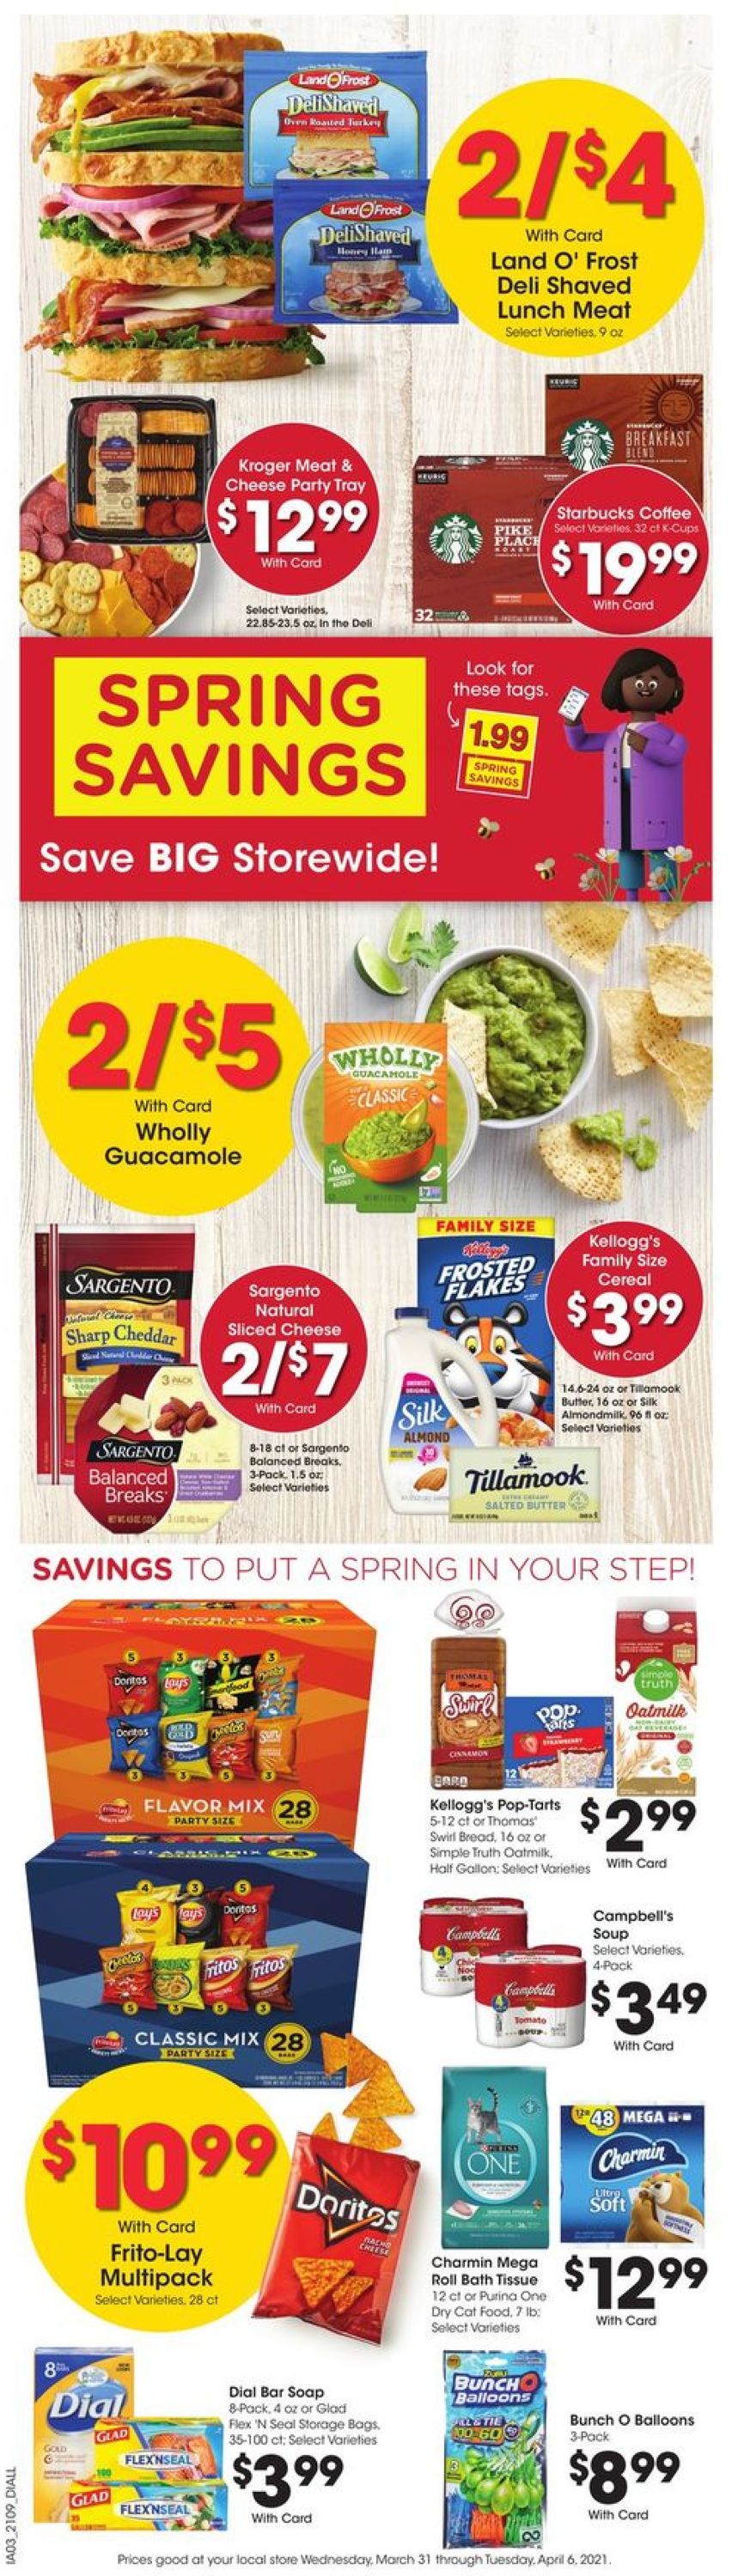 Baker's - Easter 2021 ad Weekly Ad Circular - valid 03/31-04/06/2021 (Page 10)